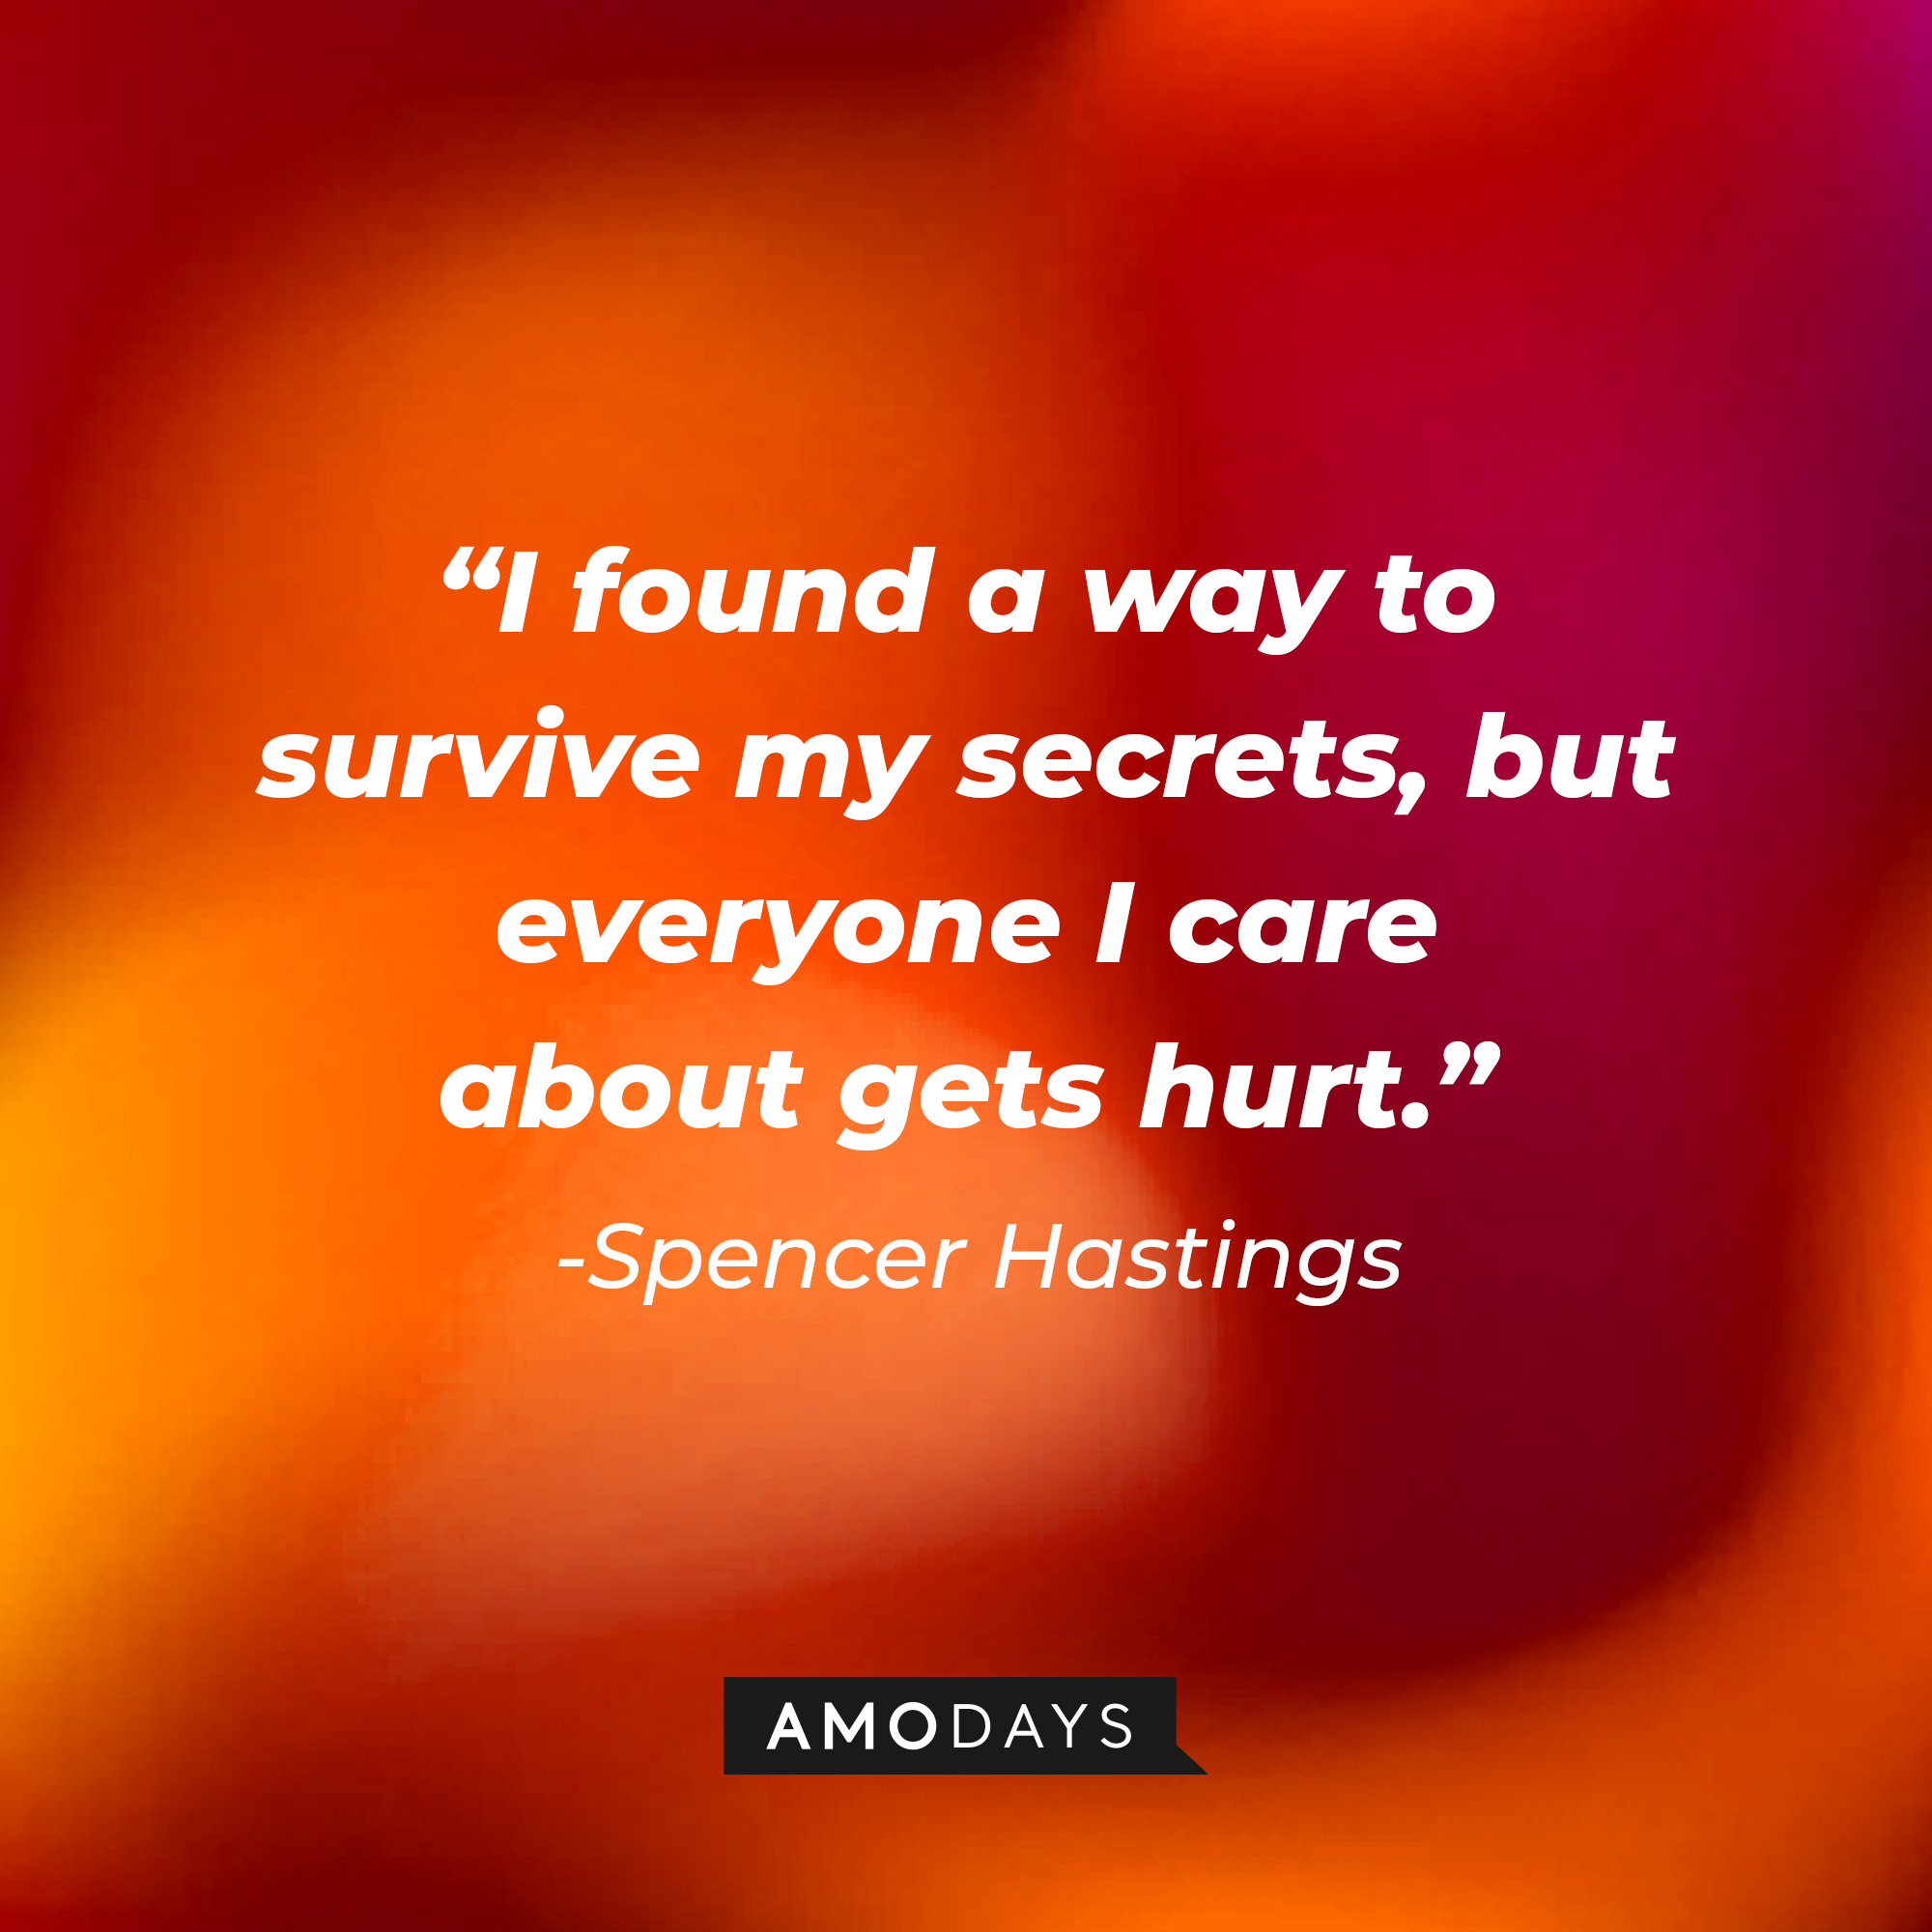 Spencer Hastings' quote: "I found a way to survive my secrets, but everyone I care about gets hurt." | Source: Amodays